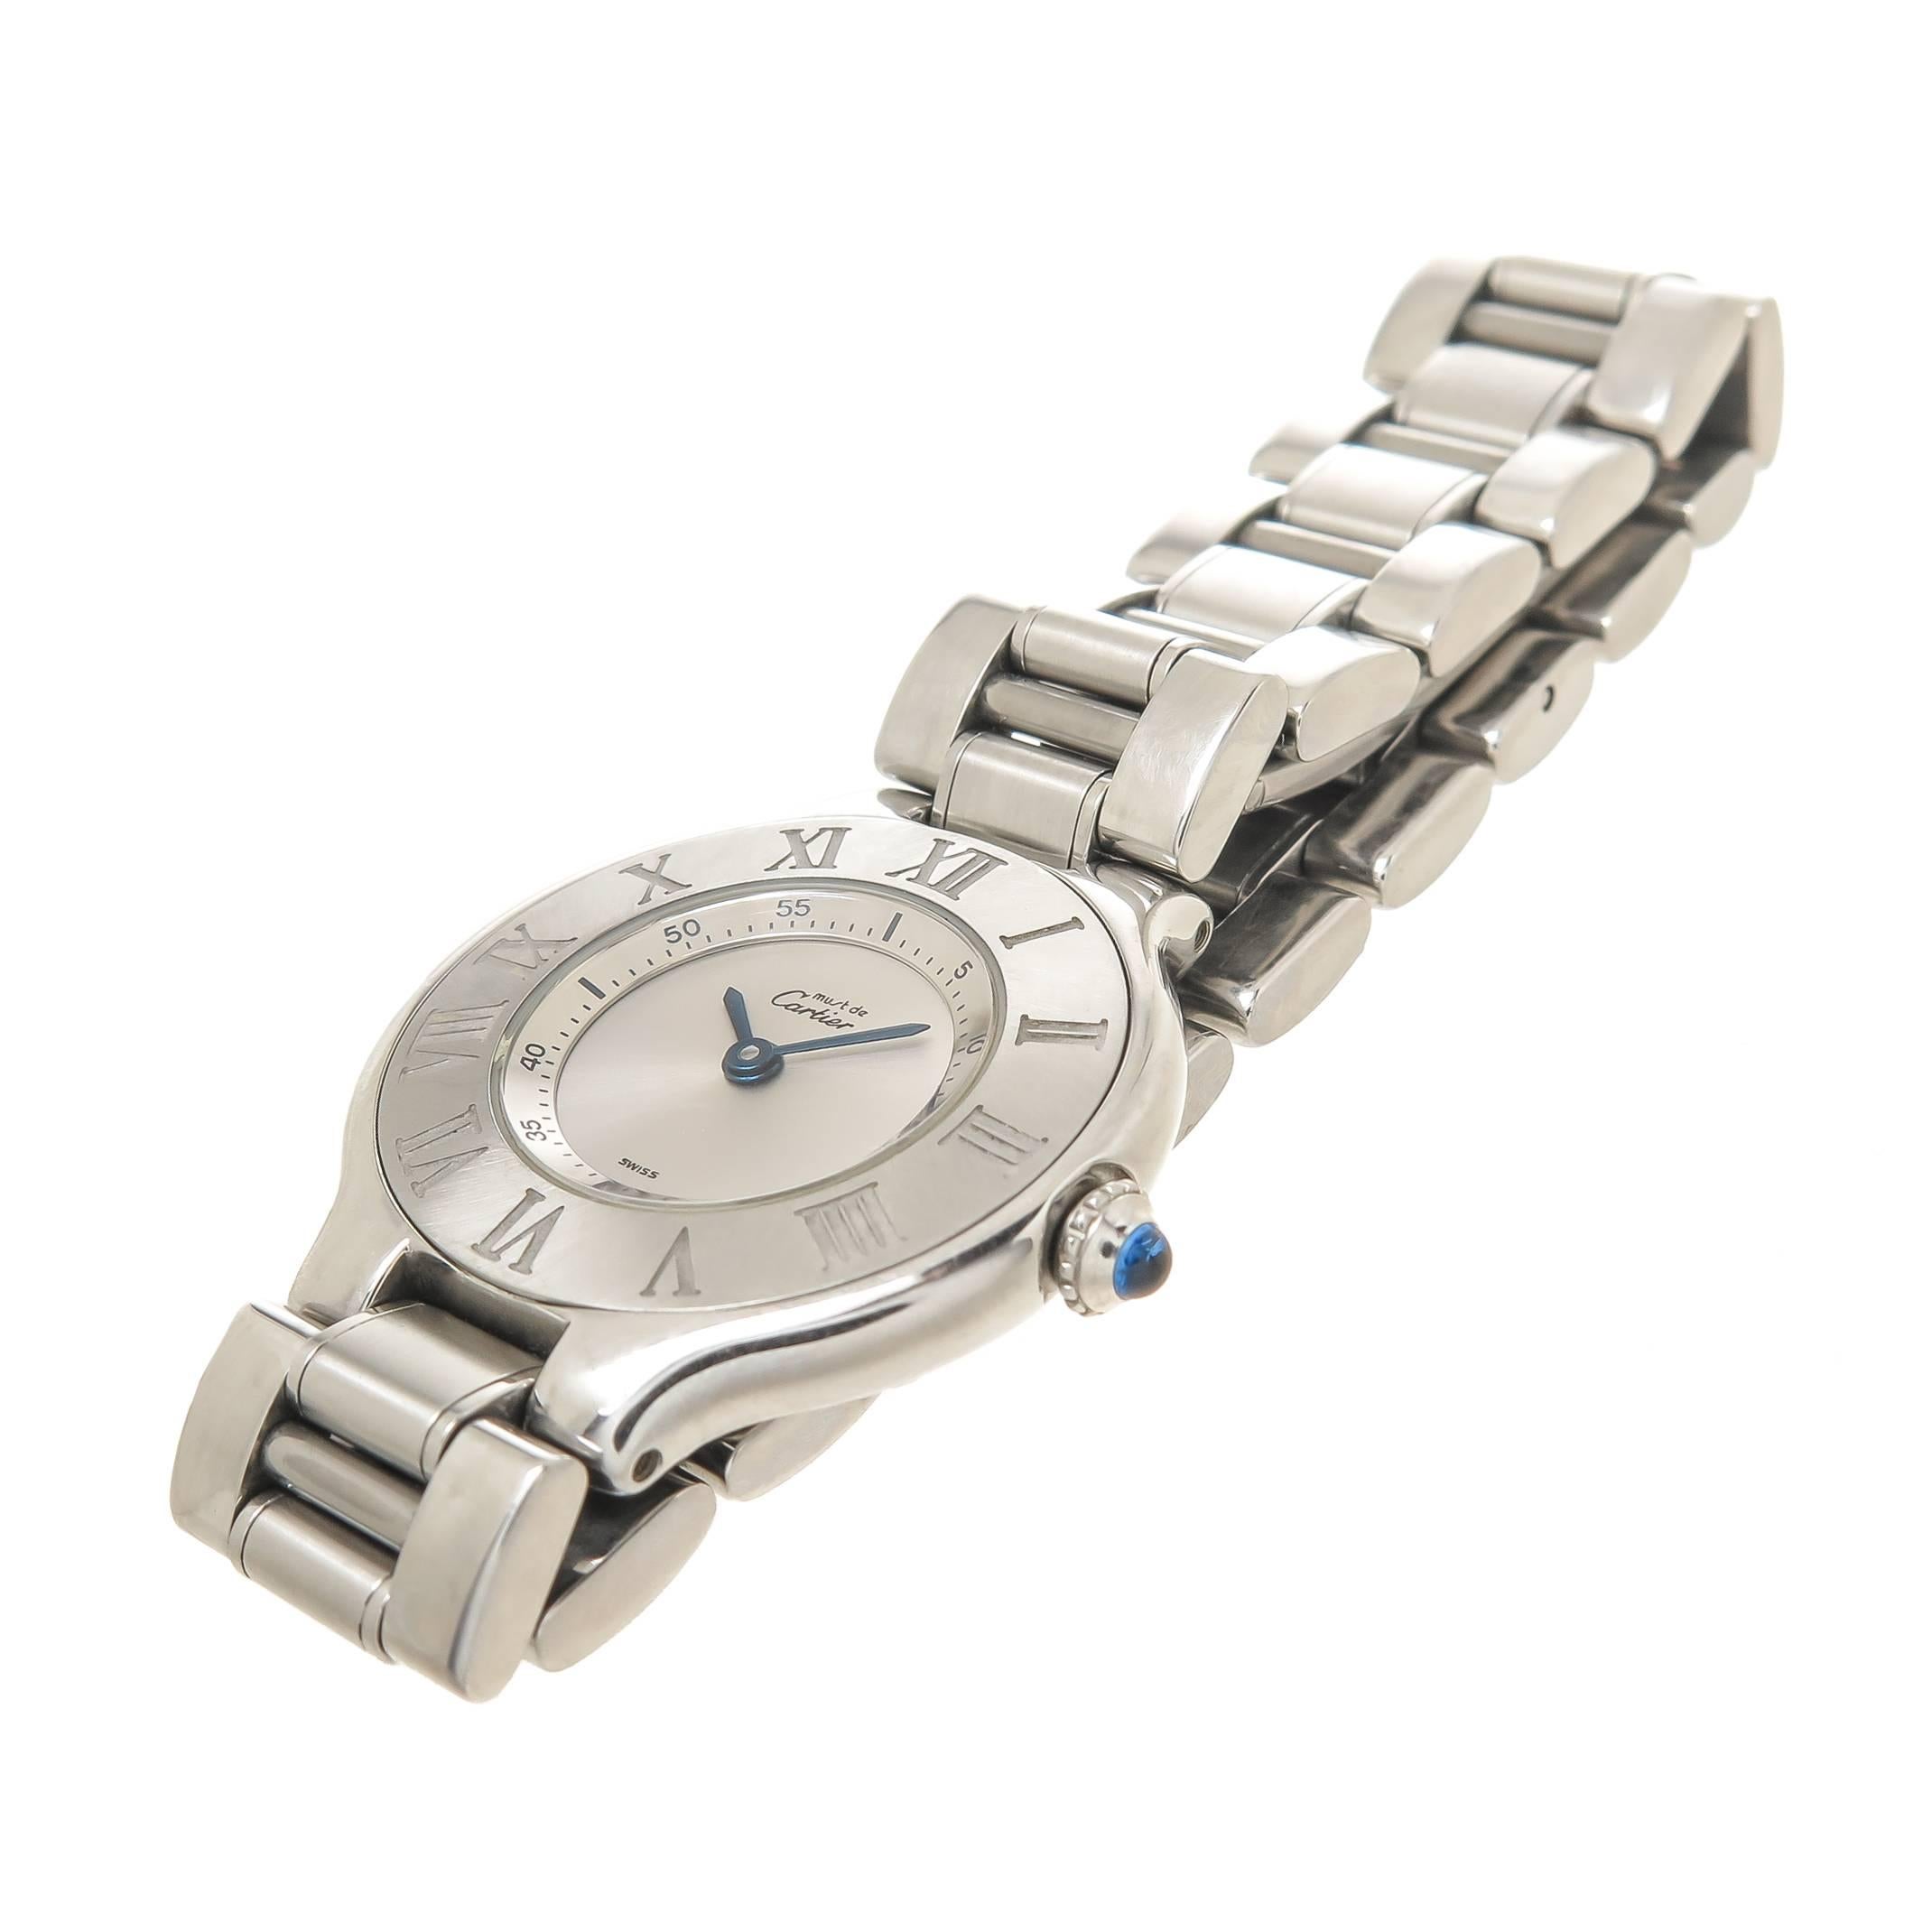 Circa 2000 Cartier Must 21 Ladies Wrist watch, 28 M.M. Stainless Steel Water Resistant case, Quartz Movement, Silver Dial, Roman Numeral Bezel, Sapphire Crown. 1/2 inch wide Stainless Steel bracelet with fold over Deployment clasp. Watch length 6